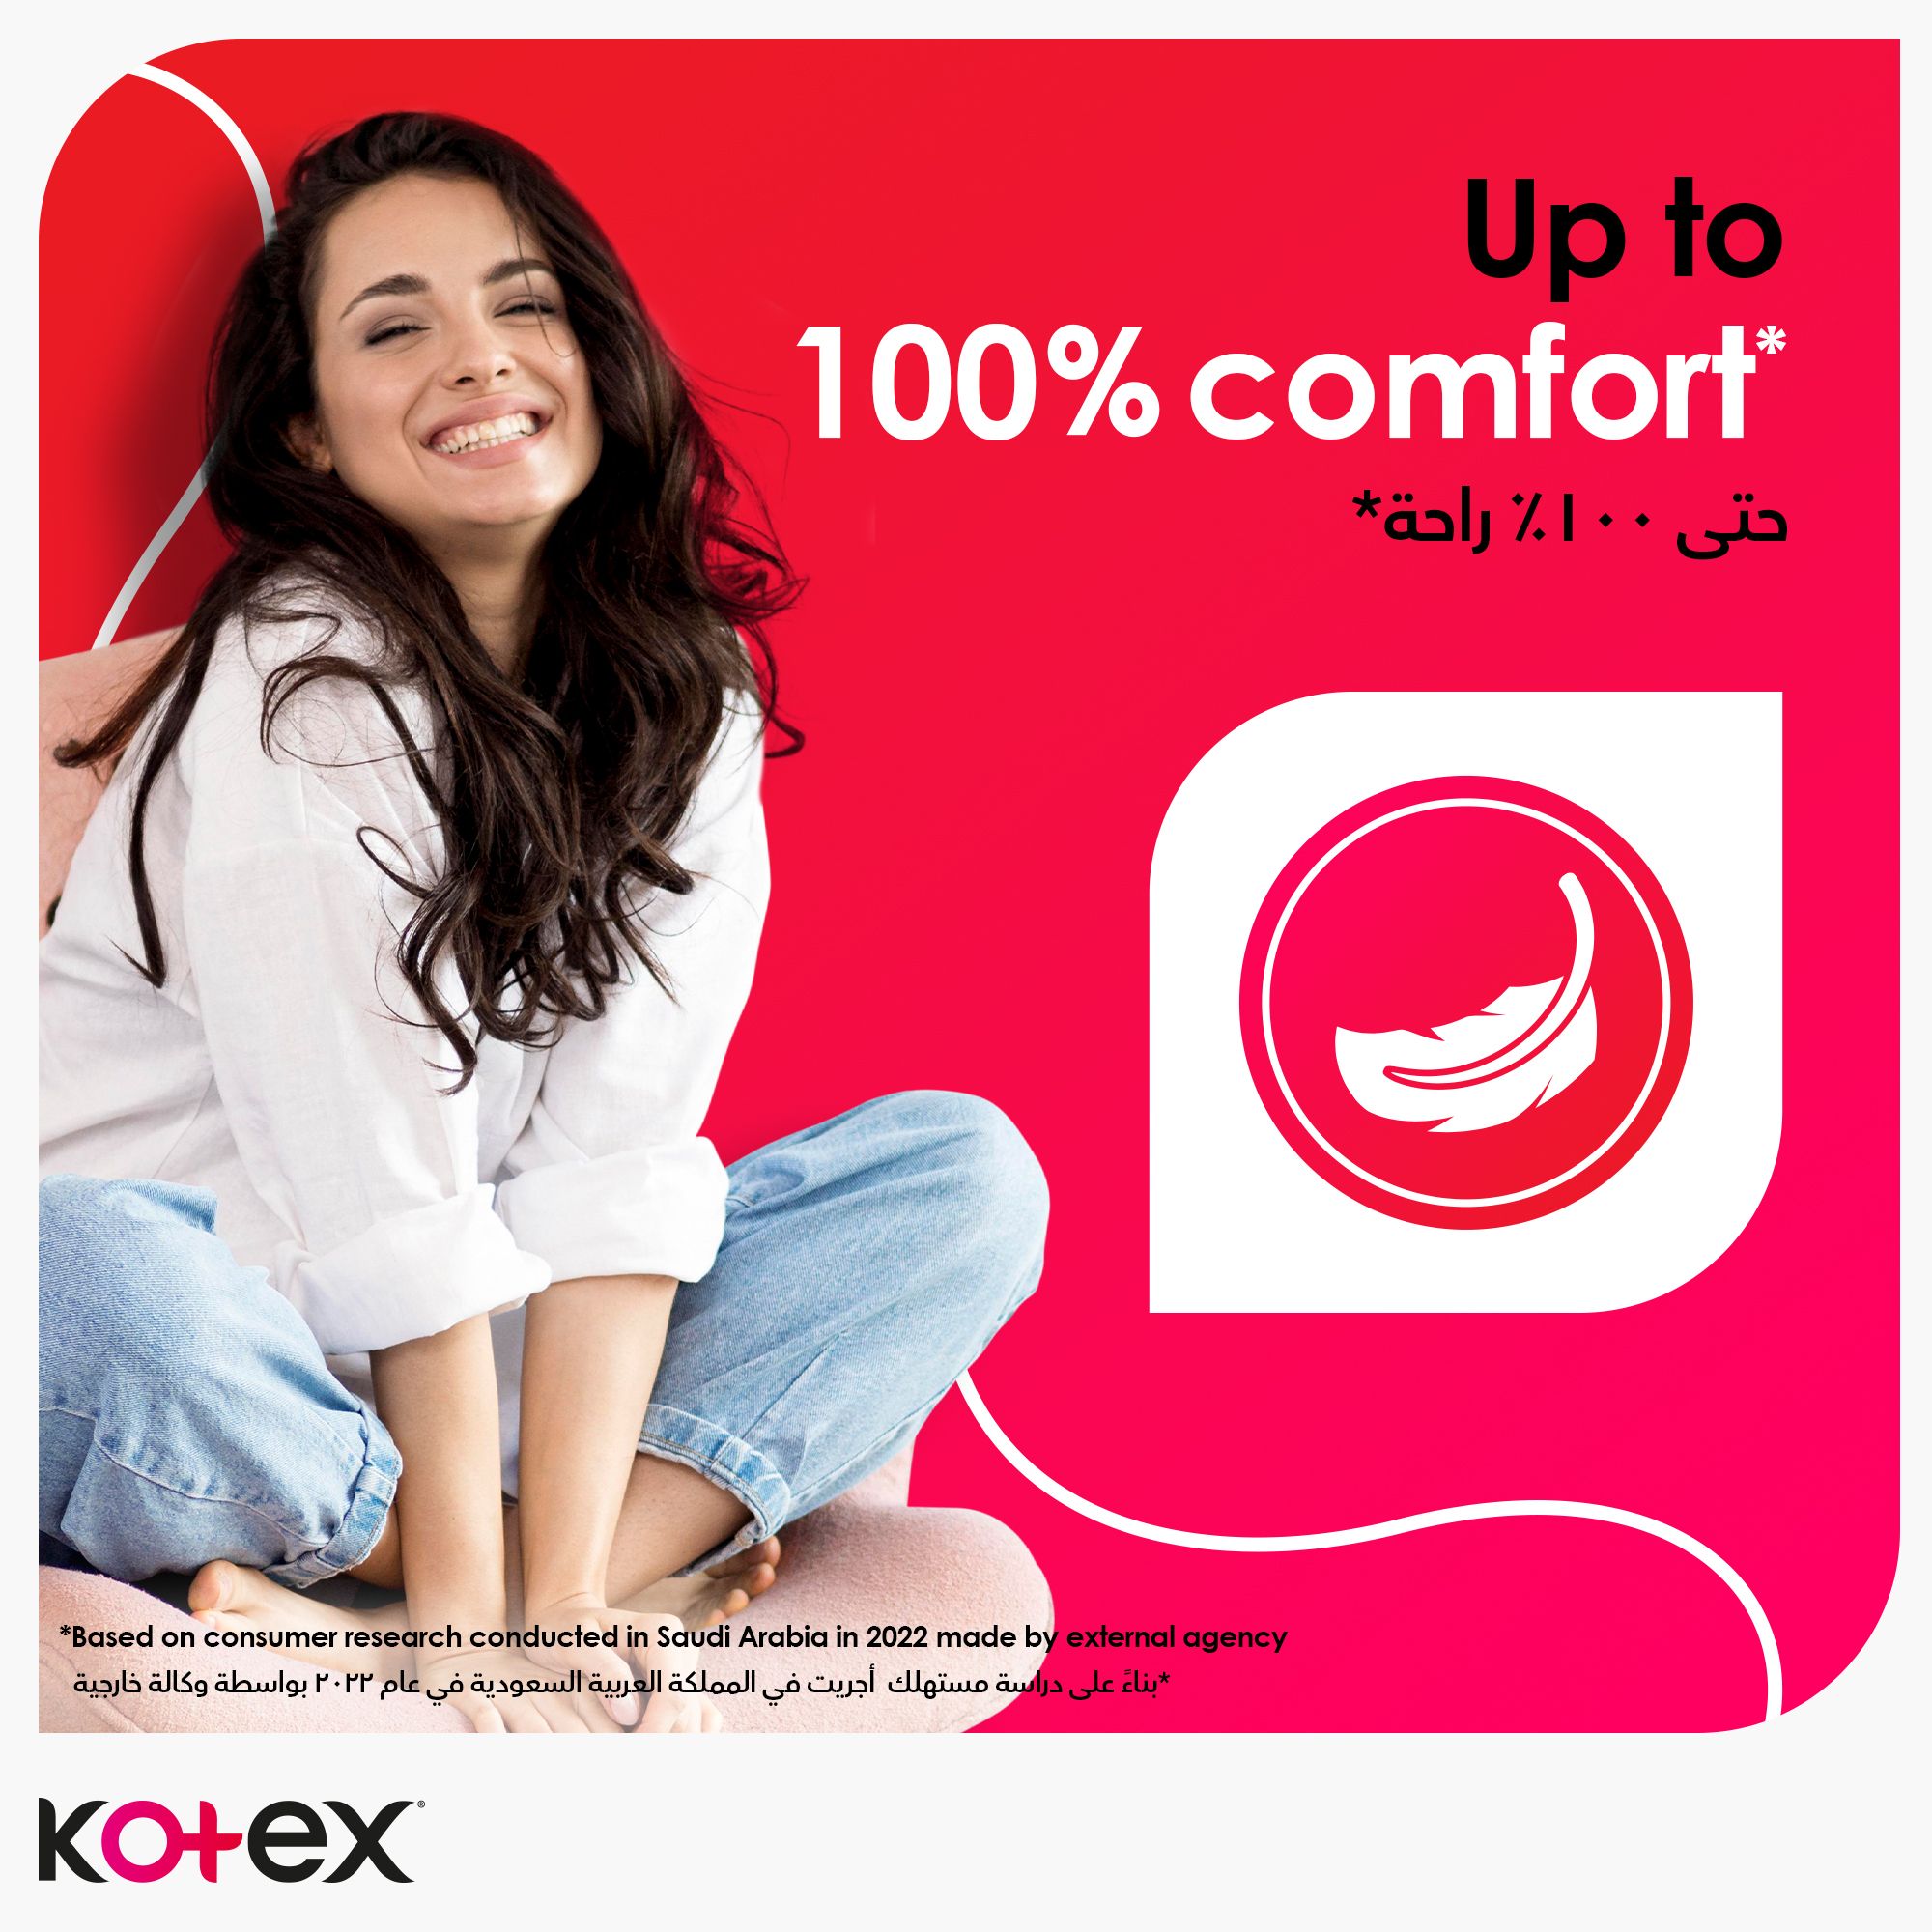 Kotex Maxi Protect Thick Pads, Normal Size Sanitary Pads with Wings, 50 Sanitary Pads